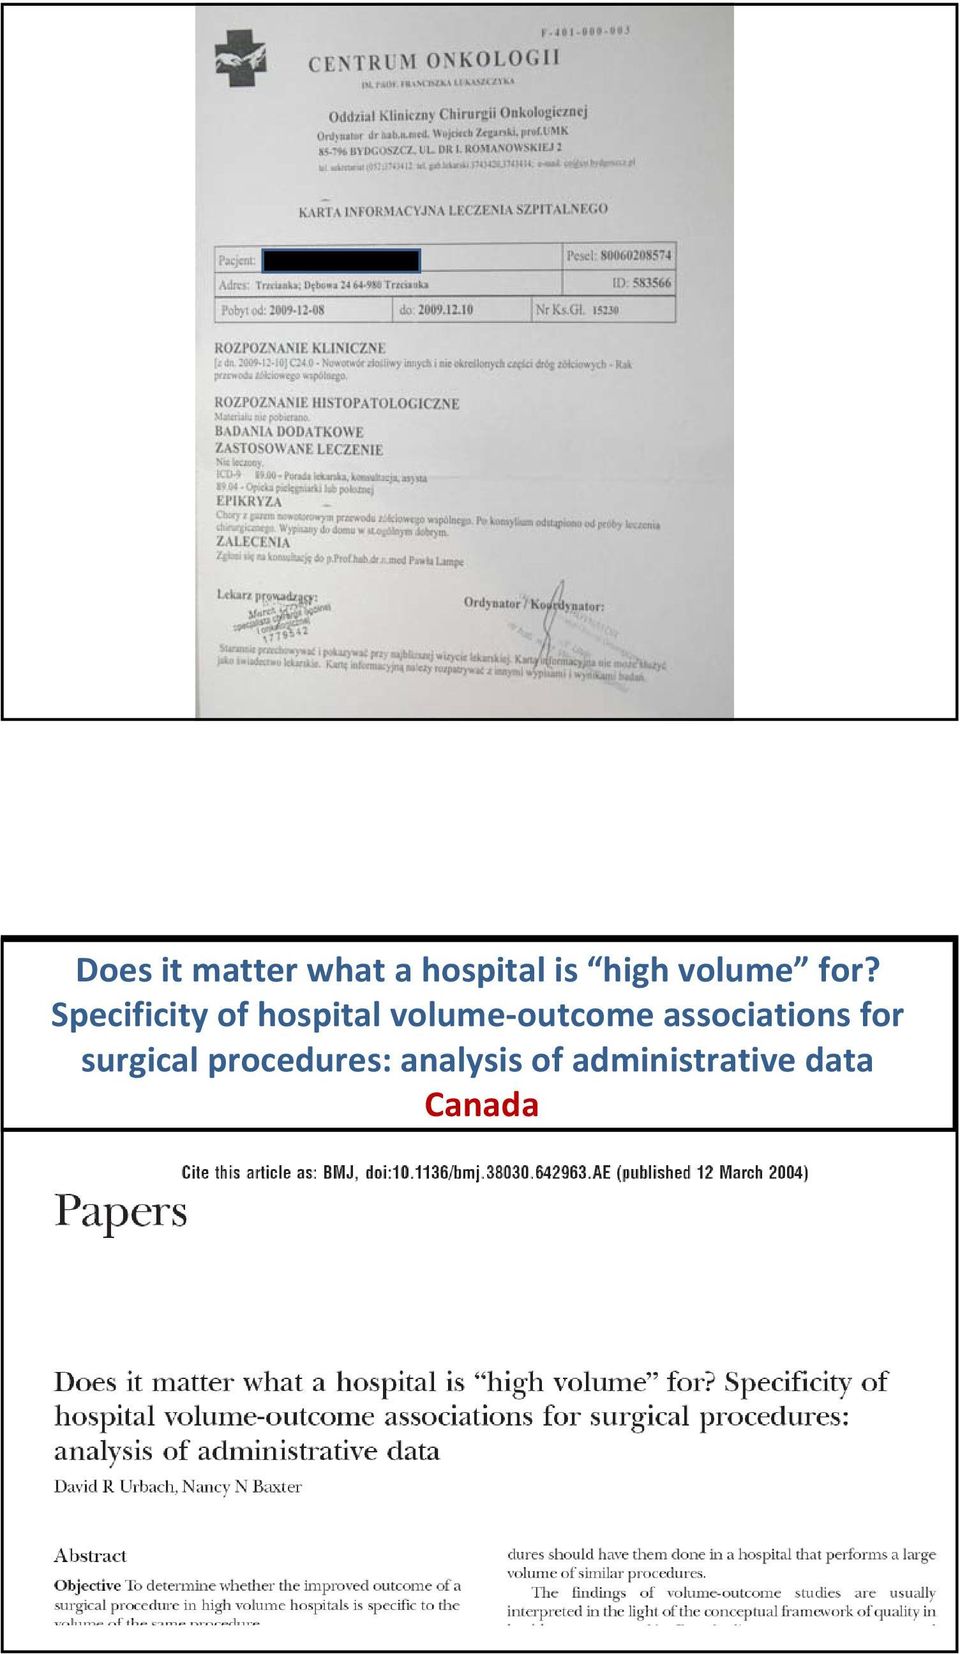 Specificity of hospital volume outcome